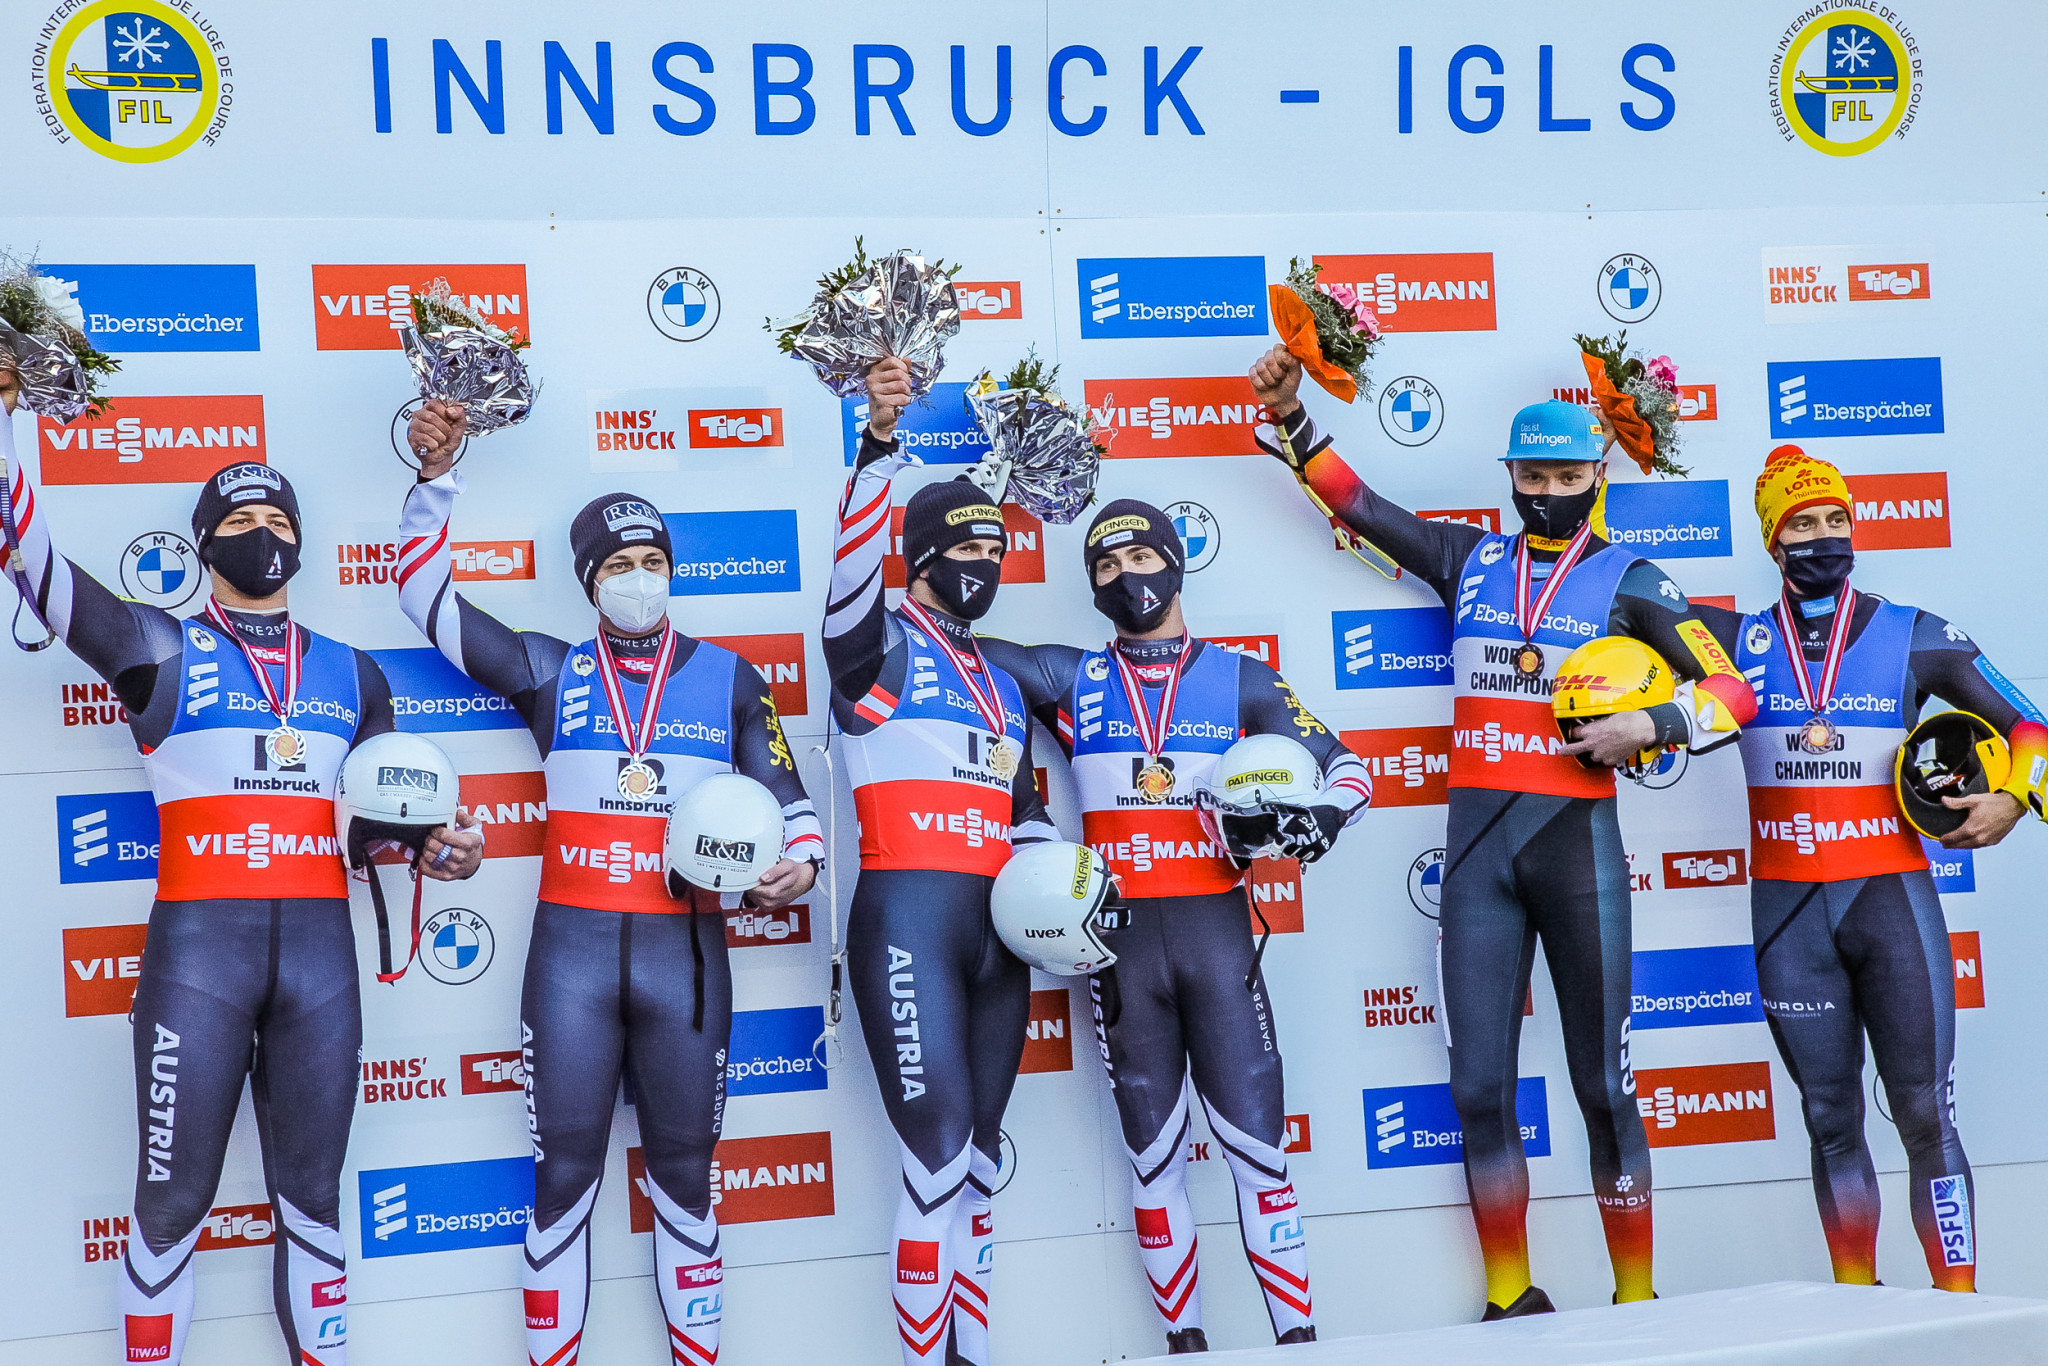 Austria secured a one-two finish in the men's doubles on the first day of the FIL World Cup in Innsbruck-Igls ©FIL